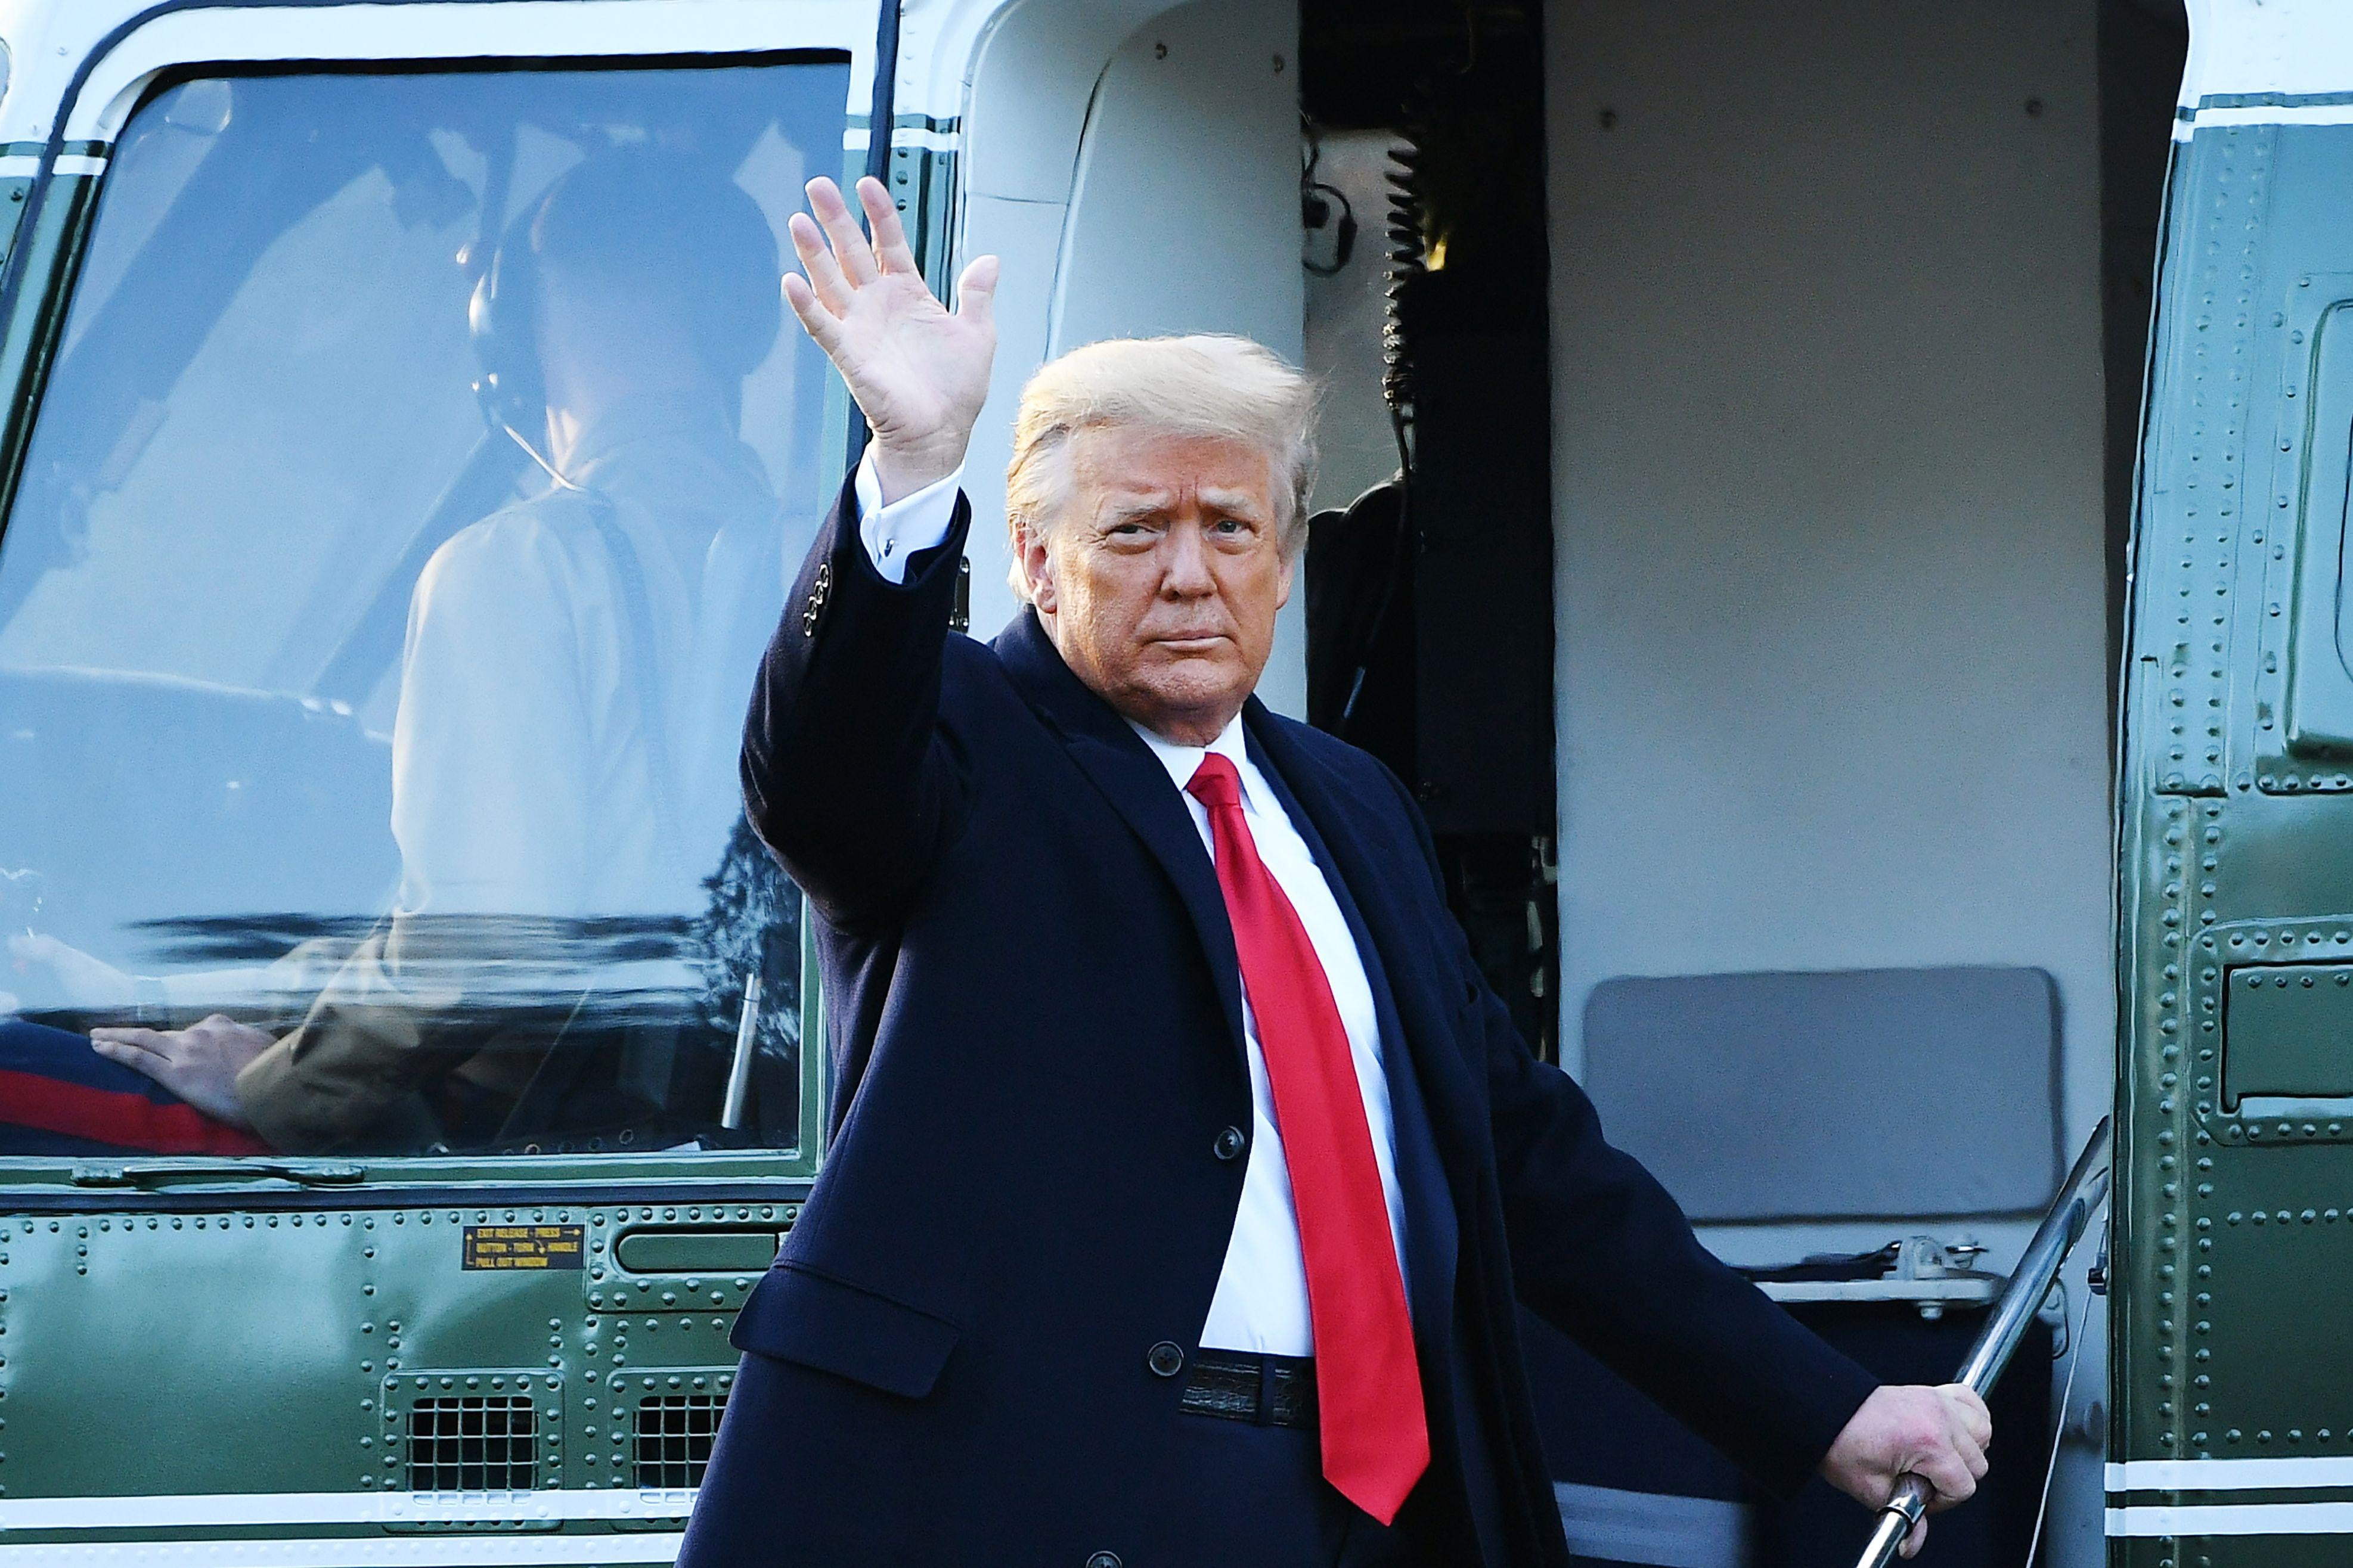 Trump waves from the stairs of a helicopter.